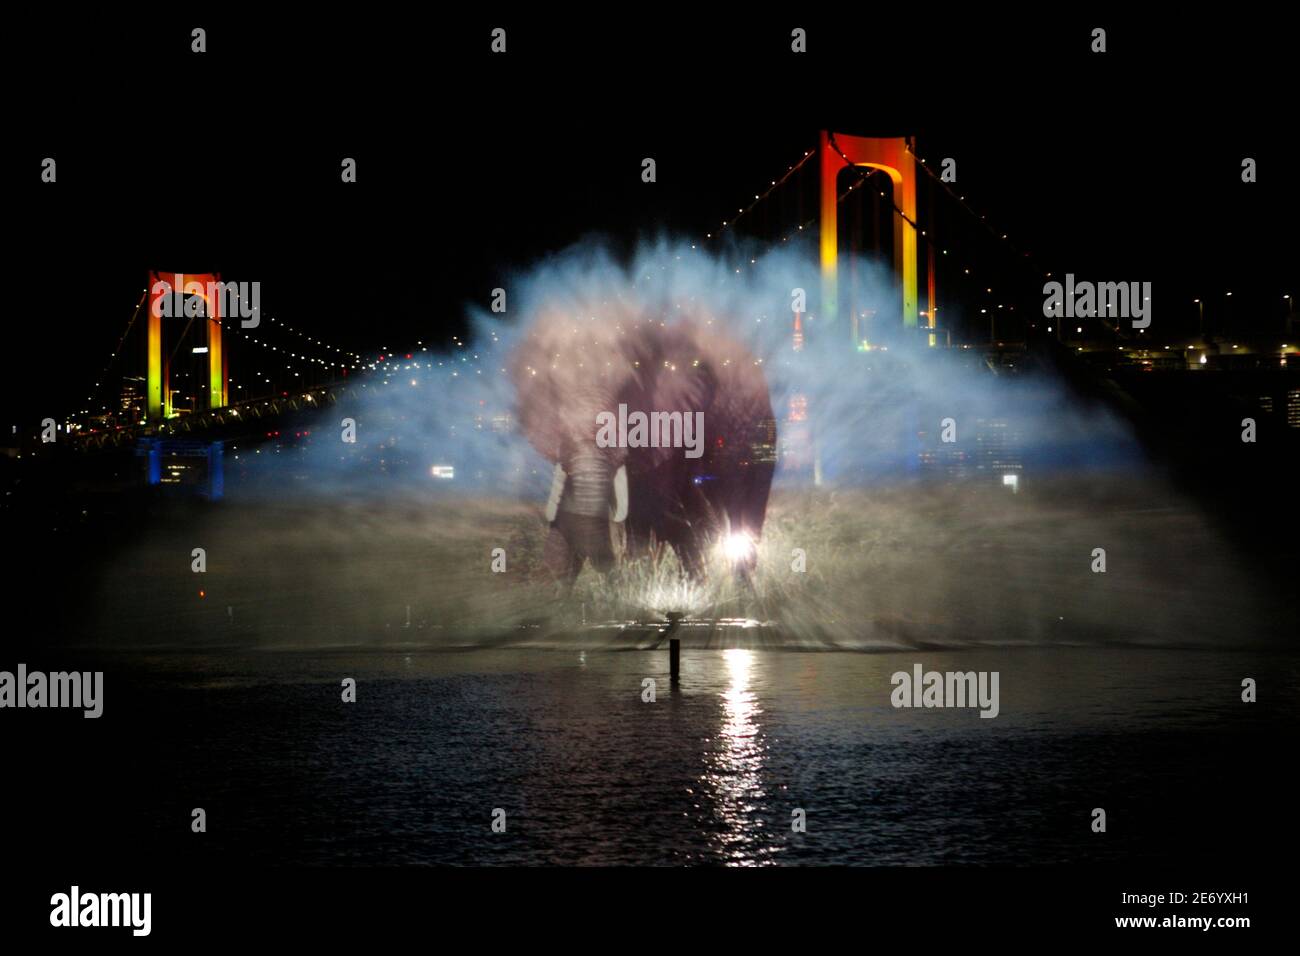 An image of an elephant is projected on a screen created by a water fountain during a press preview of 'Odaiba water illumination' show in Tokyo December 18, 2009. The 15 minute show, which projects images on a 15 meters (49 feet) tall and 40 meters (131 wide) water screen along with music, will be held from December 21 to January 11, 2010. REUTERS/Yuriko Nakao (JAPAN - Tags: SOCIETY)  BEST QUALITY AVAILABLE Stock Photo